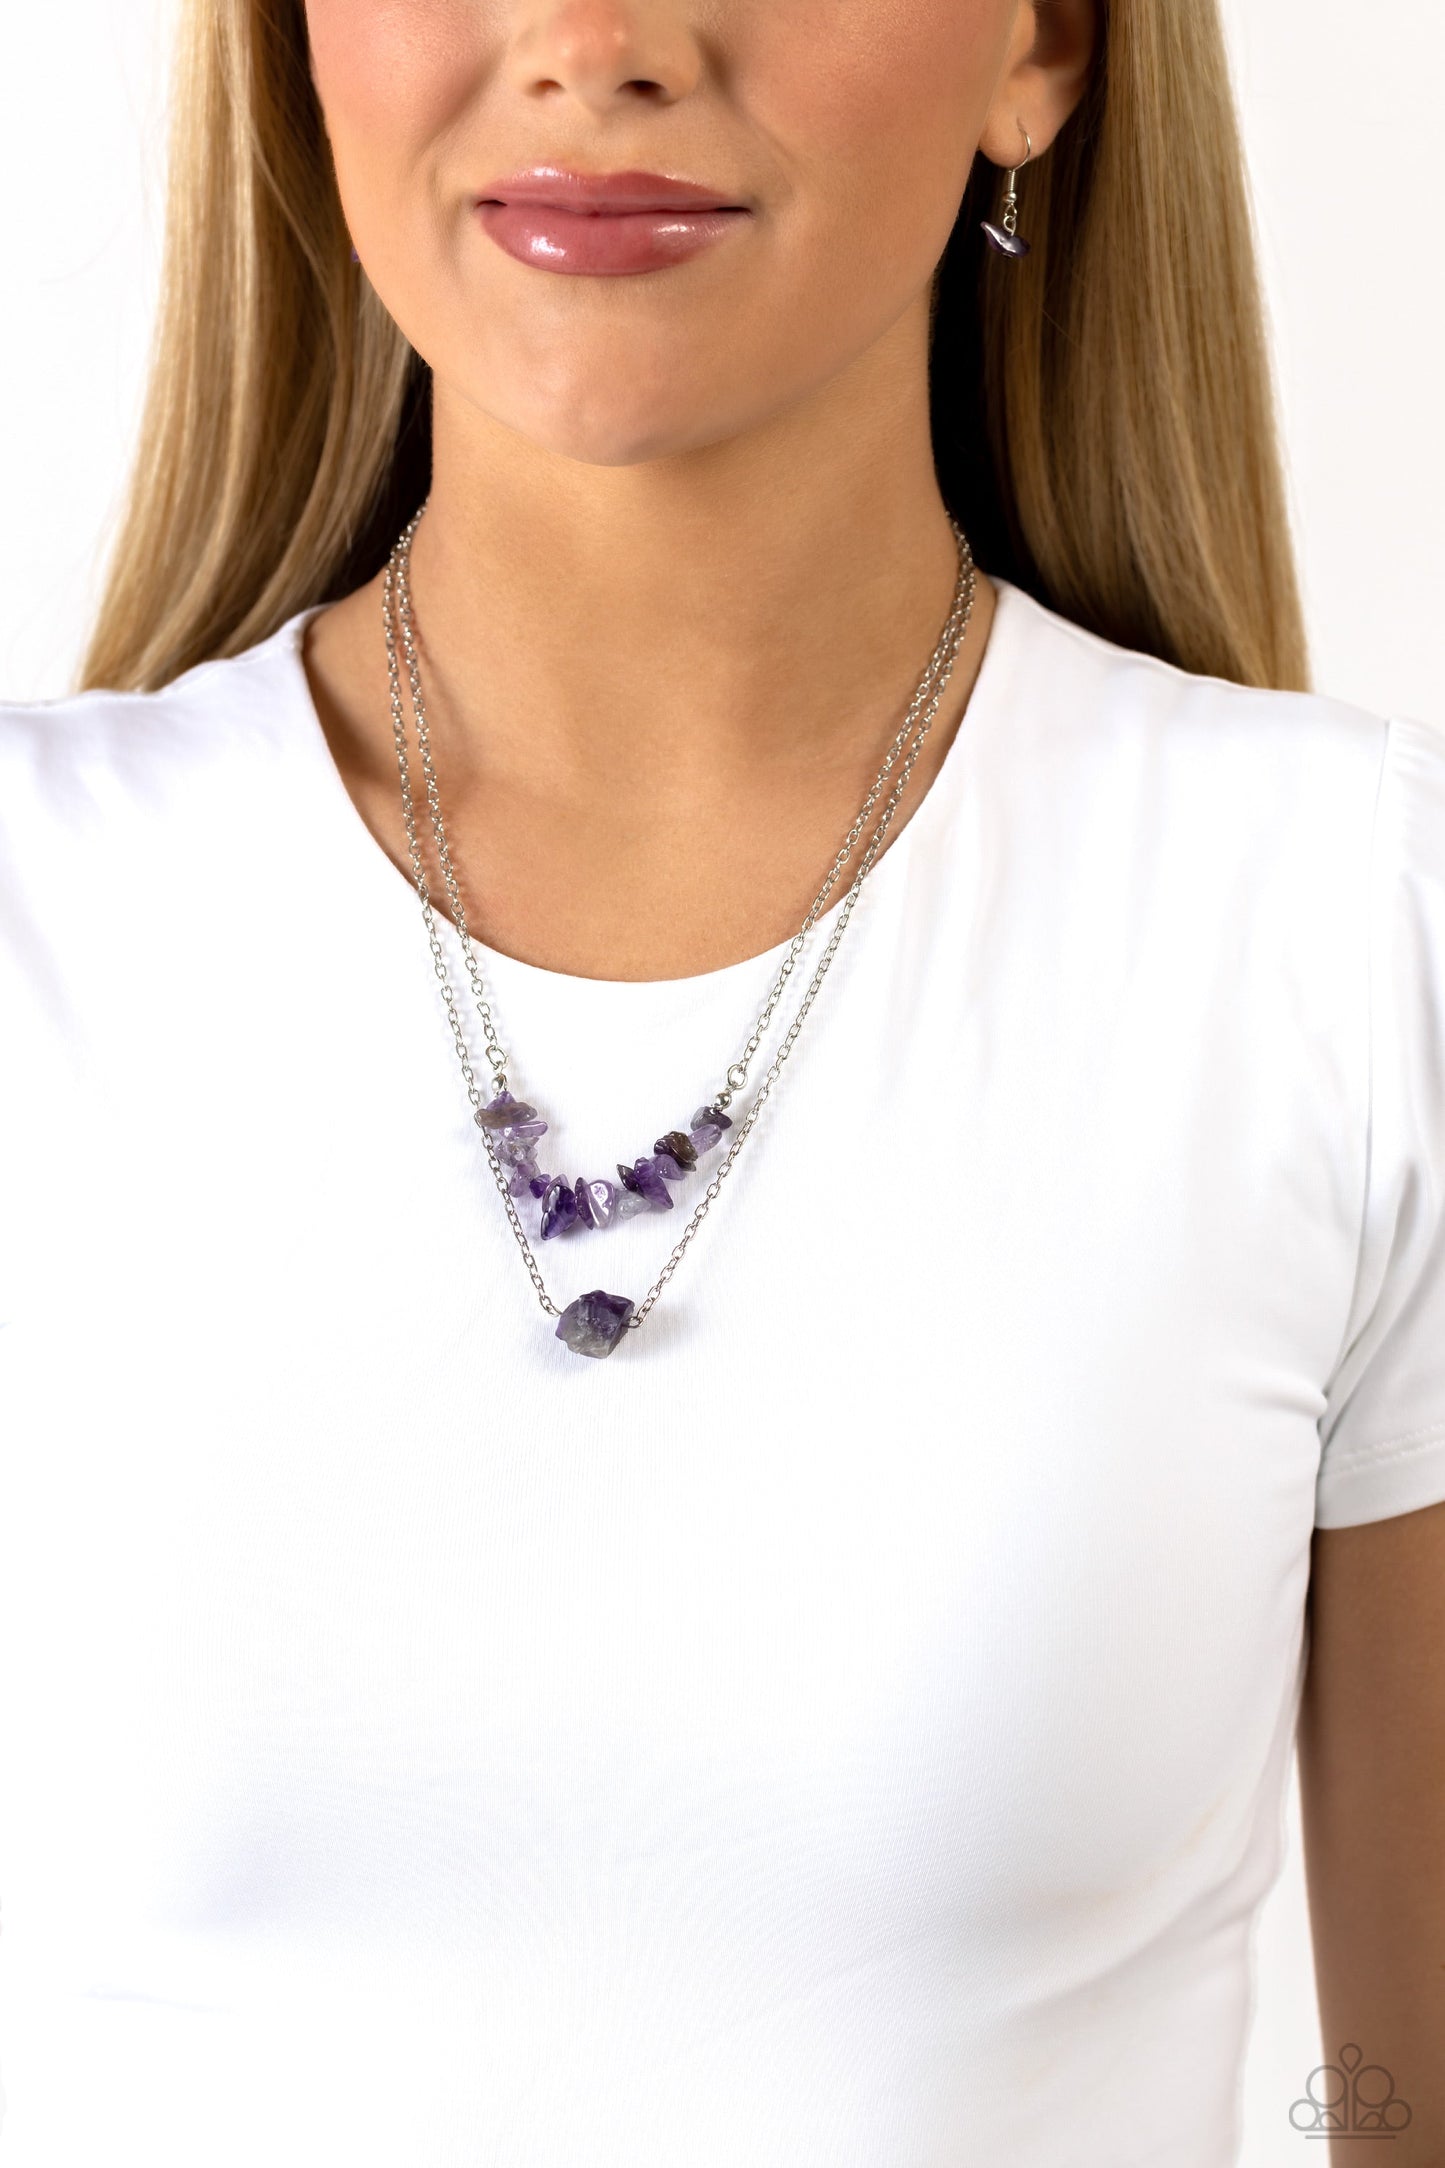 Chiseled Caliber - Purple Stone Necklace - Paparazzi Accessories - Chiseled into a natural collection, a layer of amethyst stones gives way to a large, solitaire amethyst stone pendant, creating earthy layers down the chest. Features an adjustable clasp closure.